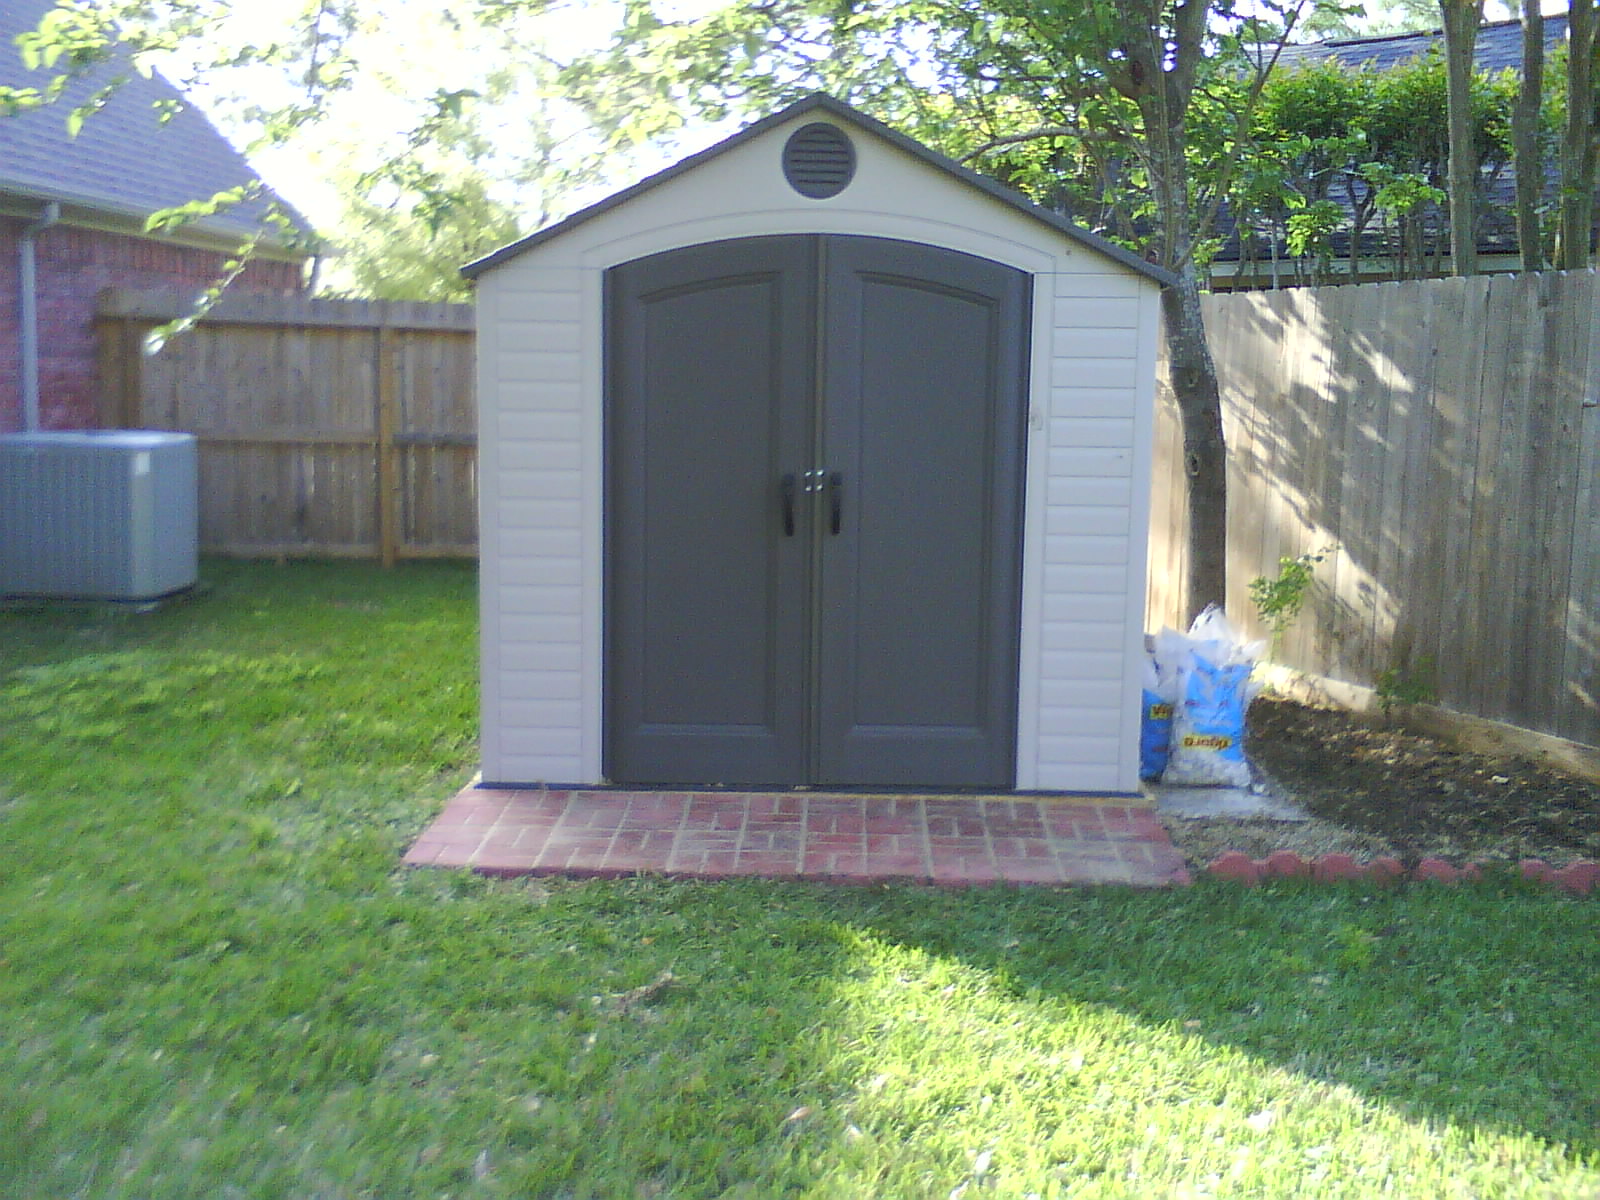 Home Improvements: Shed